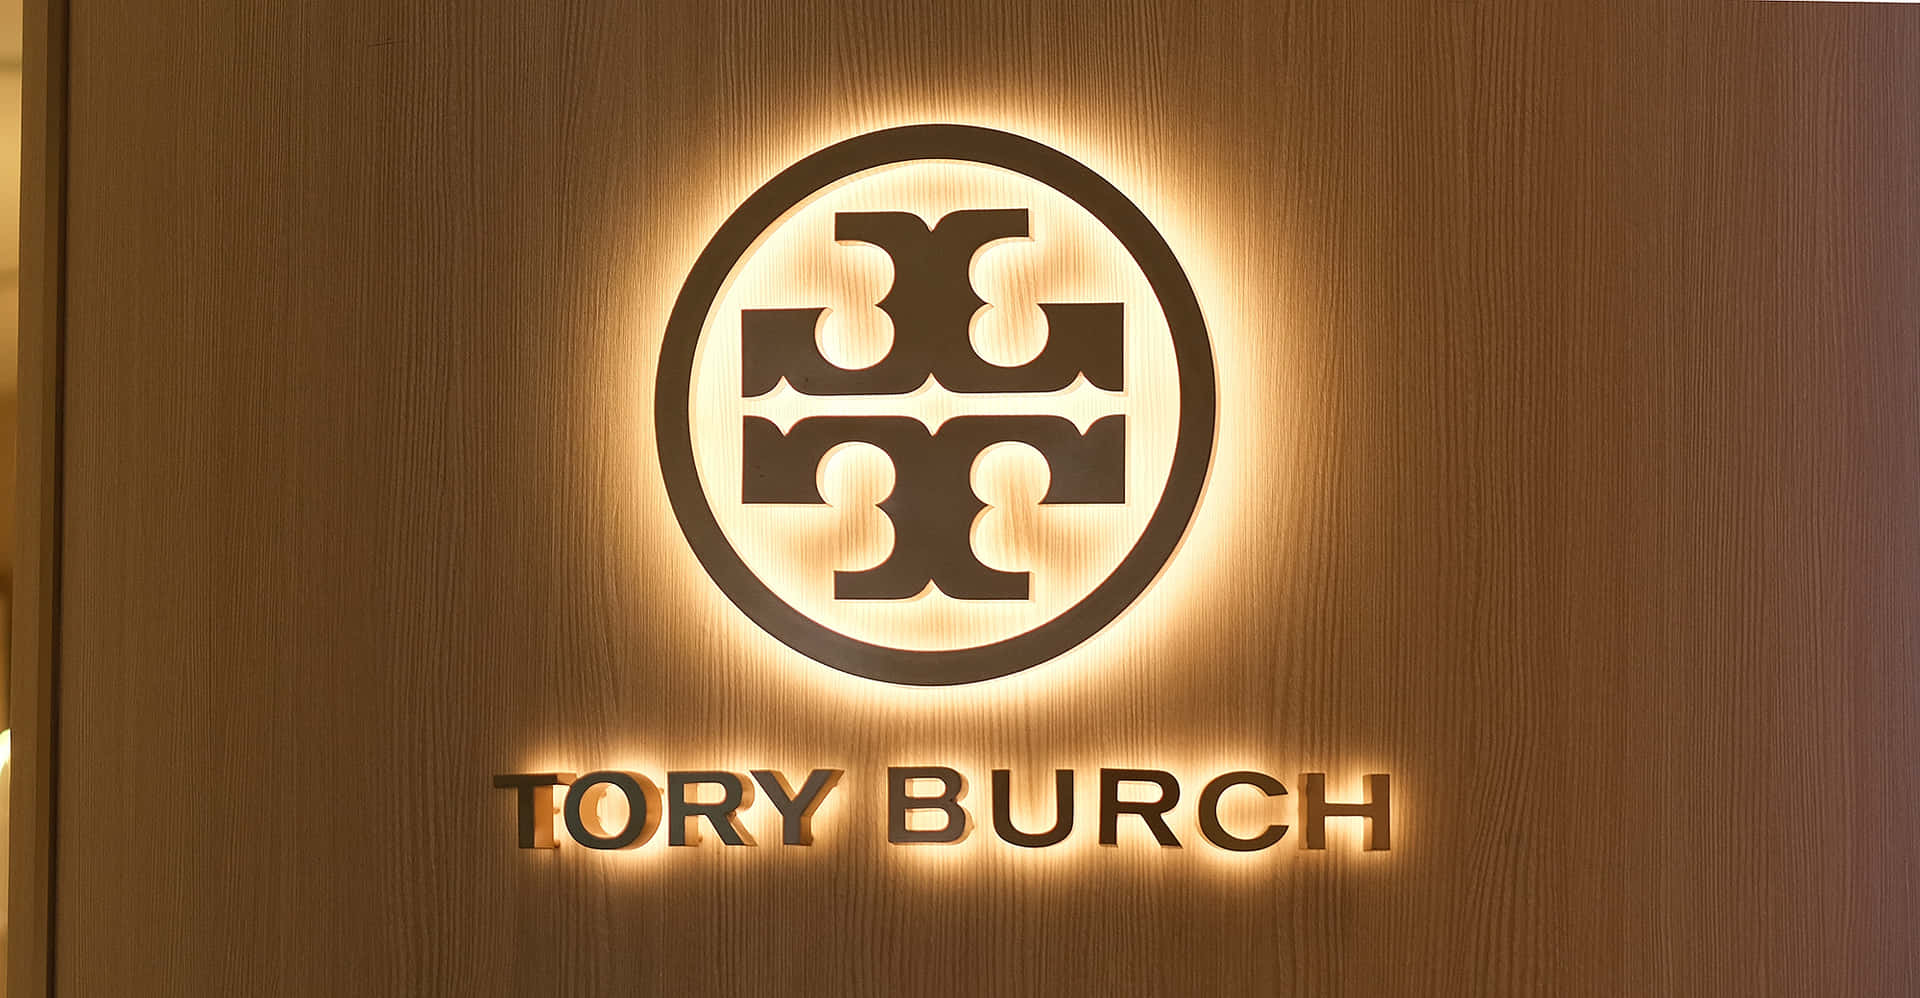 Download Celebrate Your Signature Style with Tory Burch | Wallpapers.com